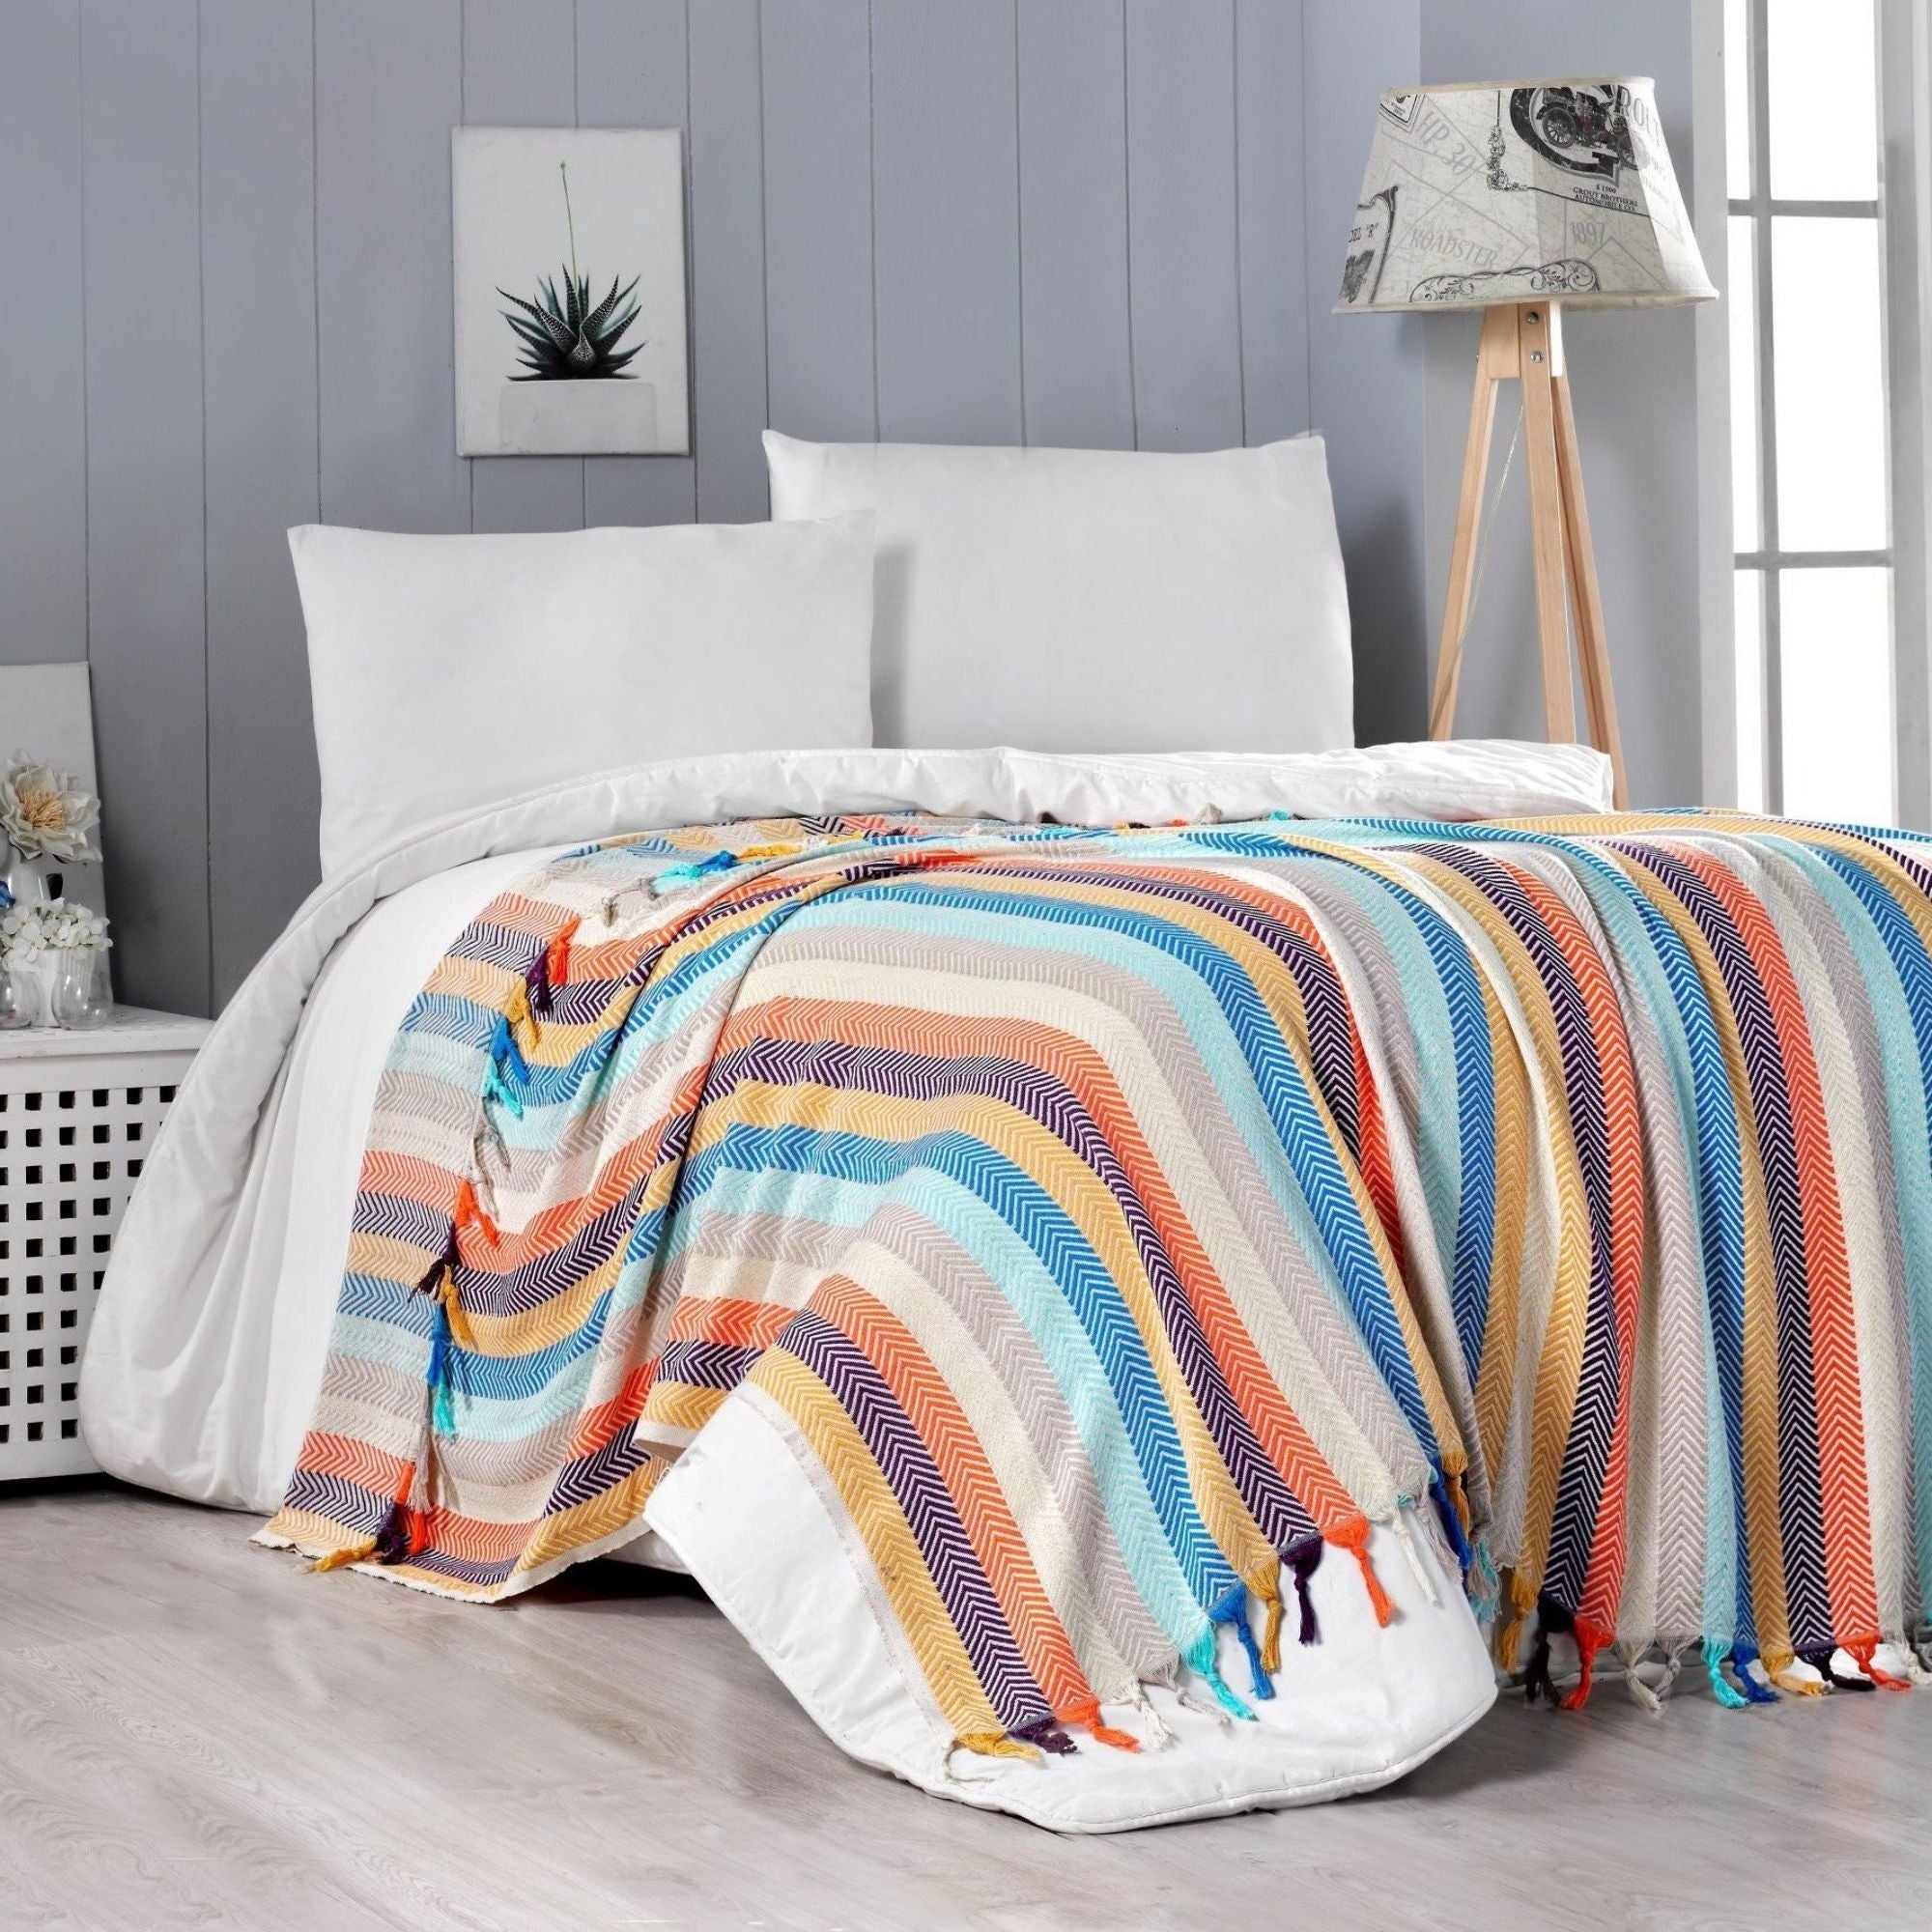 TRIMITA Original Colourful 100% Turkish Cotton Bedspread, Throw Blanket for Couch and Sofa, Extra Large 79"x86", Lightweight and Super Soft